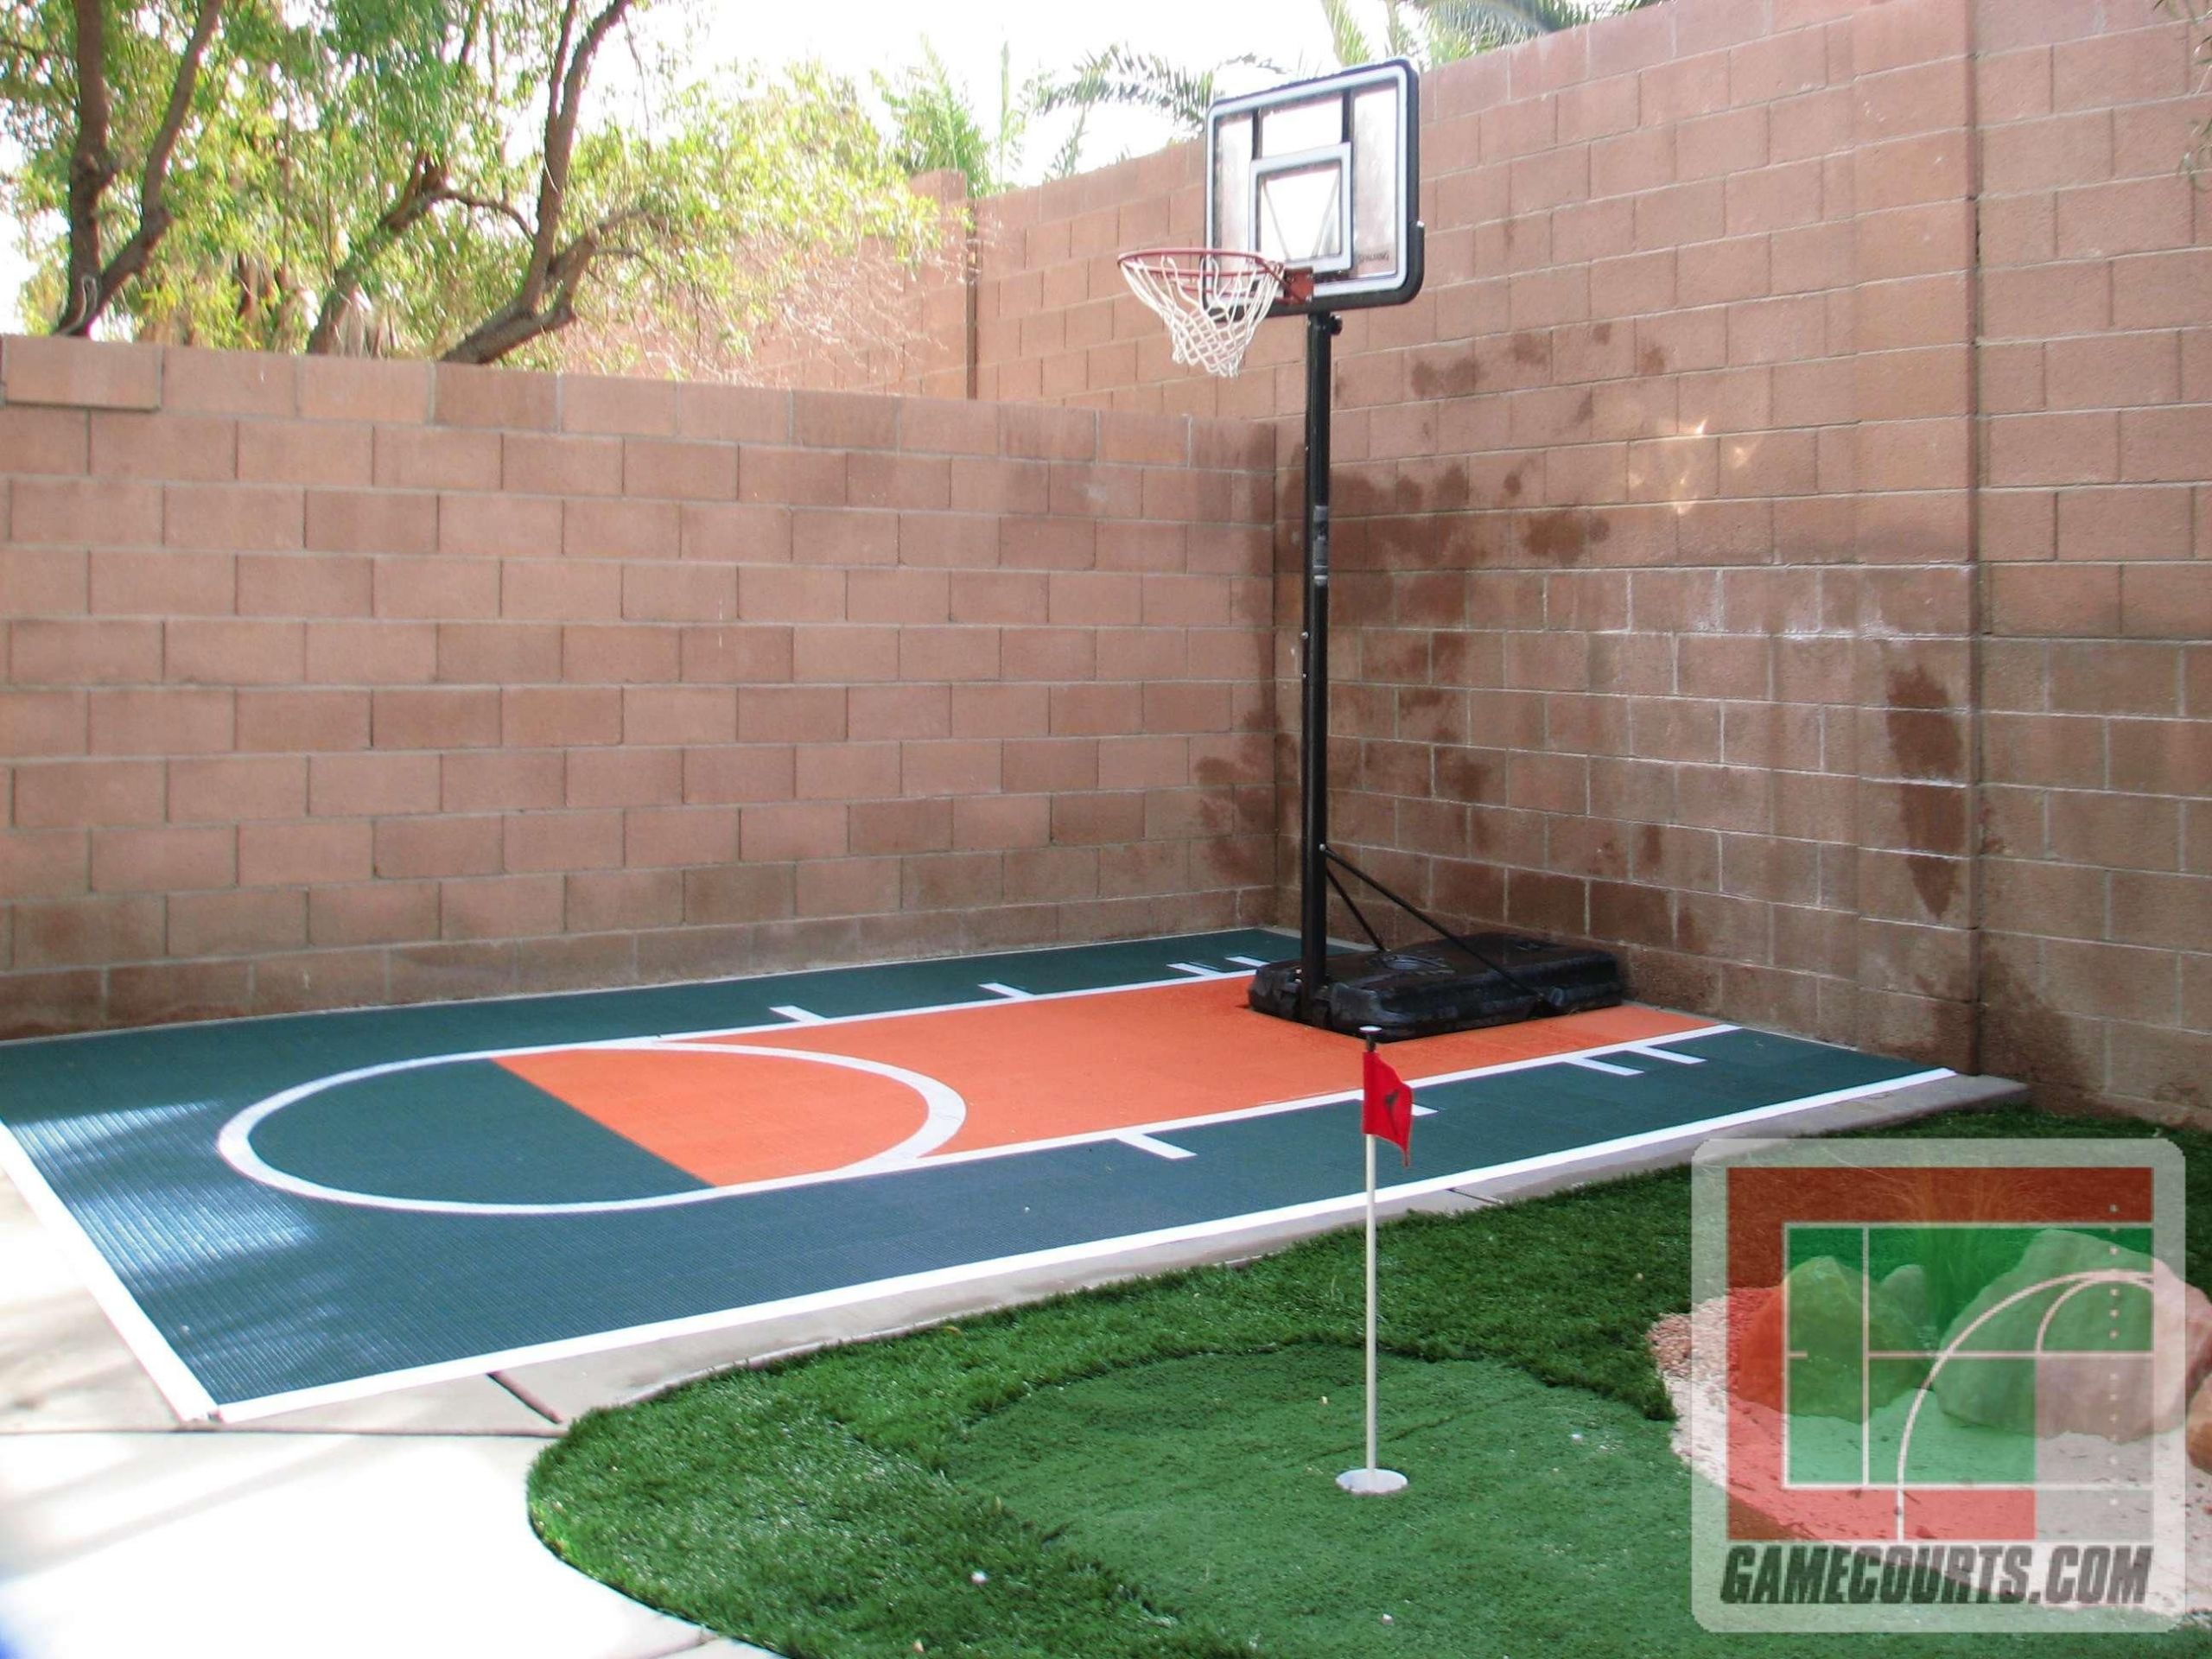 Small Backyard Basketball Court
 We could probably fit a mini court like this in one of the